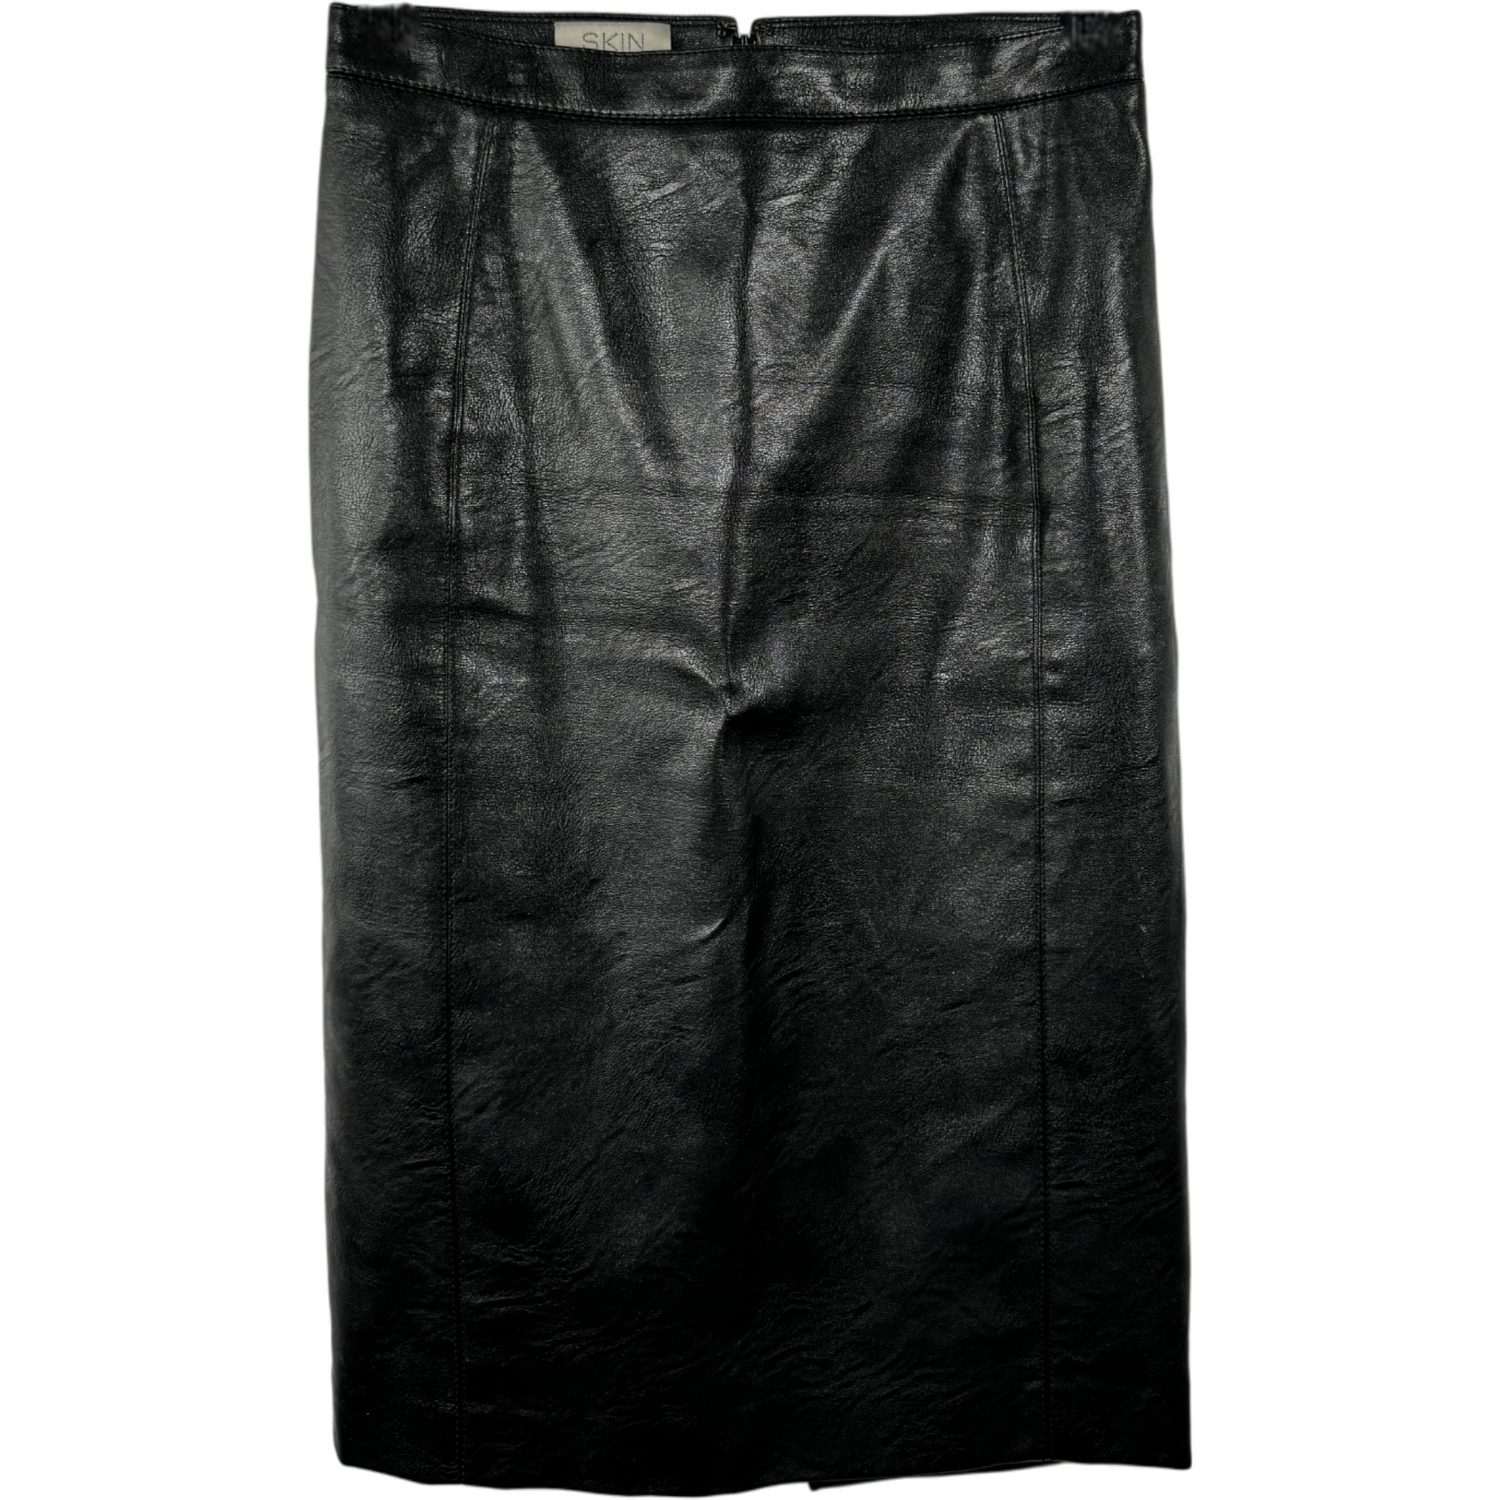 Vegan Leather Skirt with stretch fabric reverse panelling